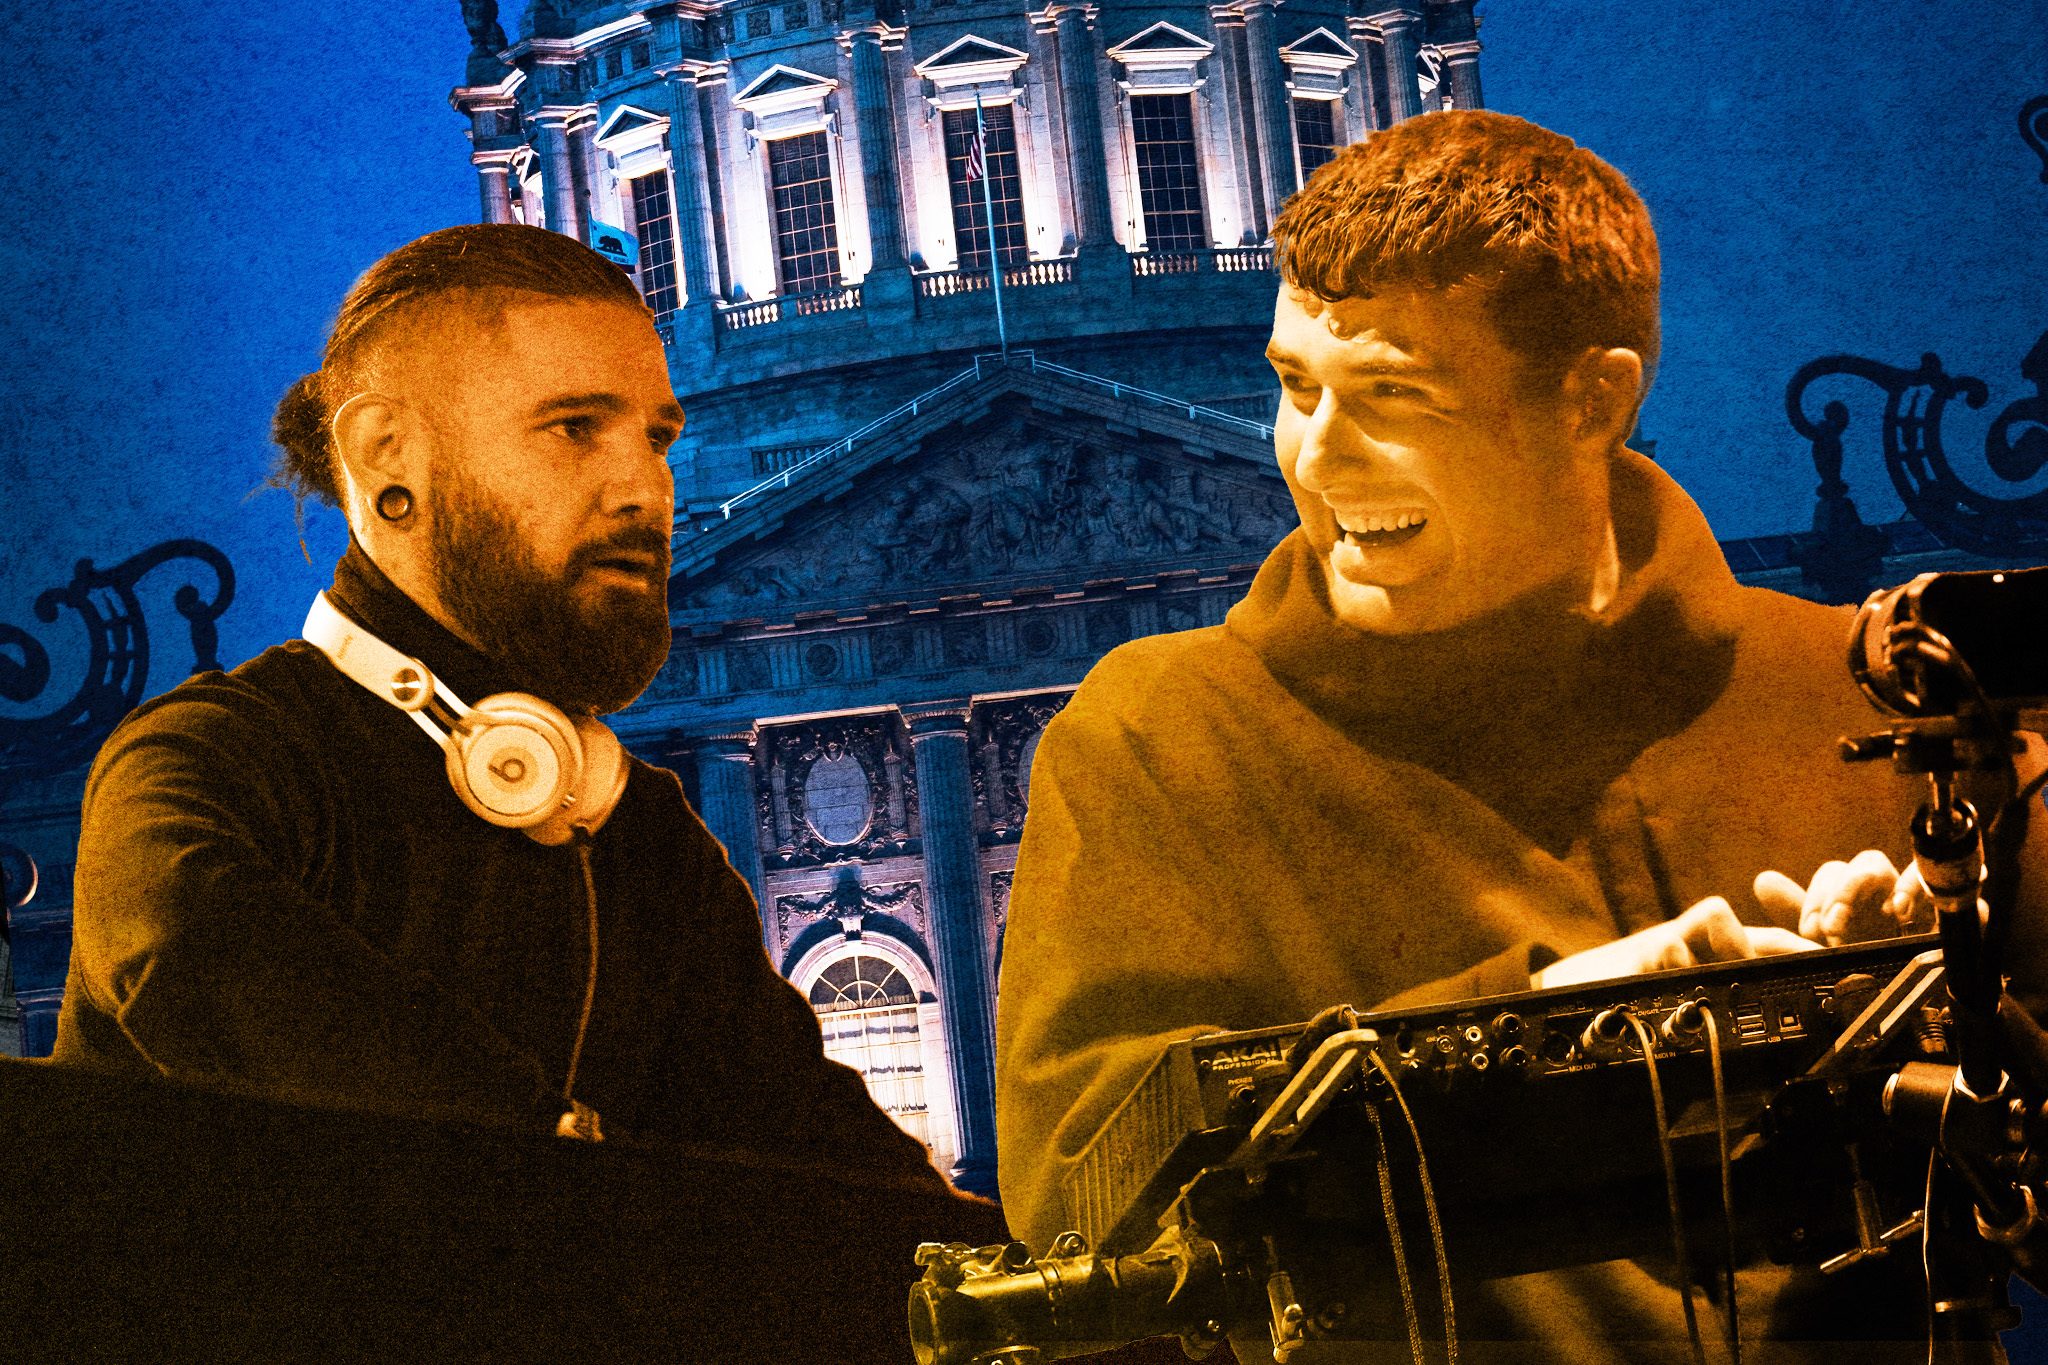 Two men are in the foreground; one with a beard and headphones, focused, and the other is smiling at a keyboard. A large, ornate building is illuminated behind them.